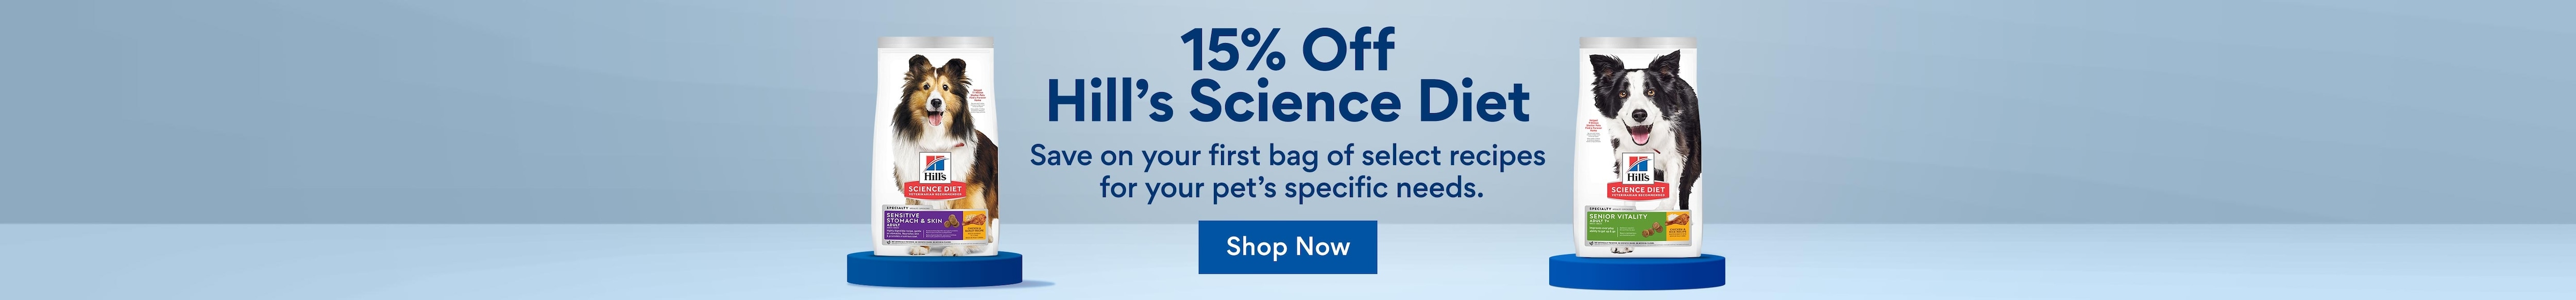 15% Off Hill's Science Diet. Save on your first bag of select recipes for your pet's specific needs.